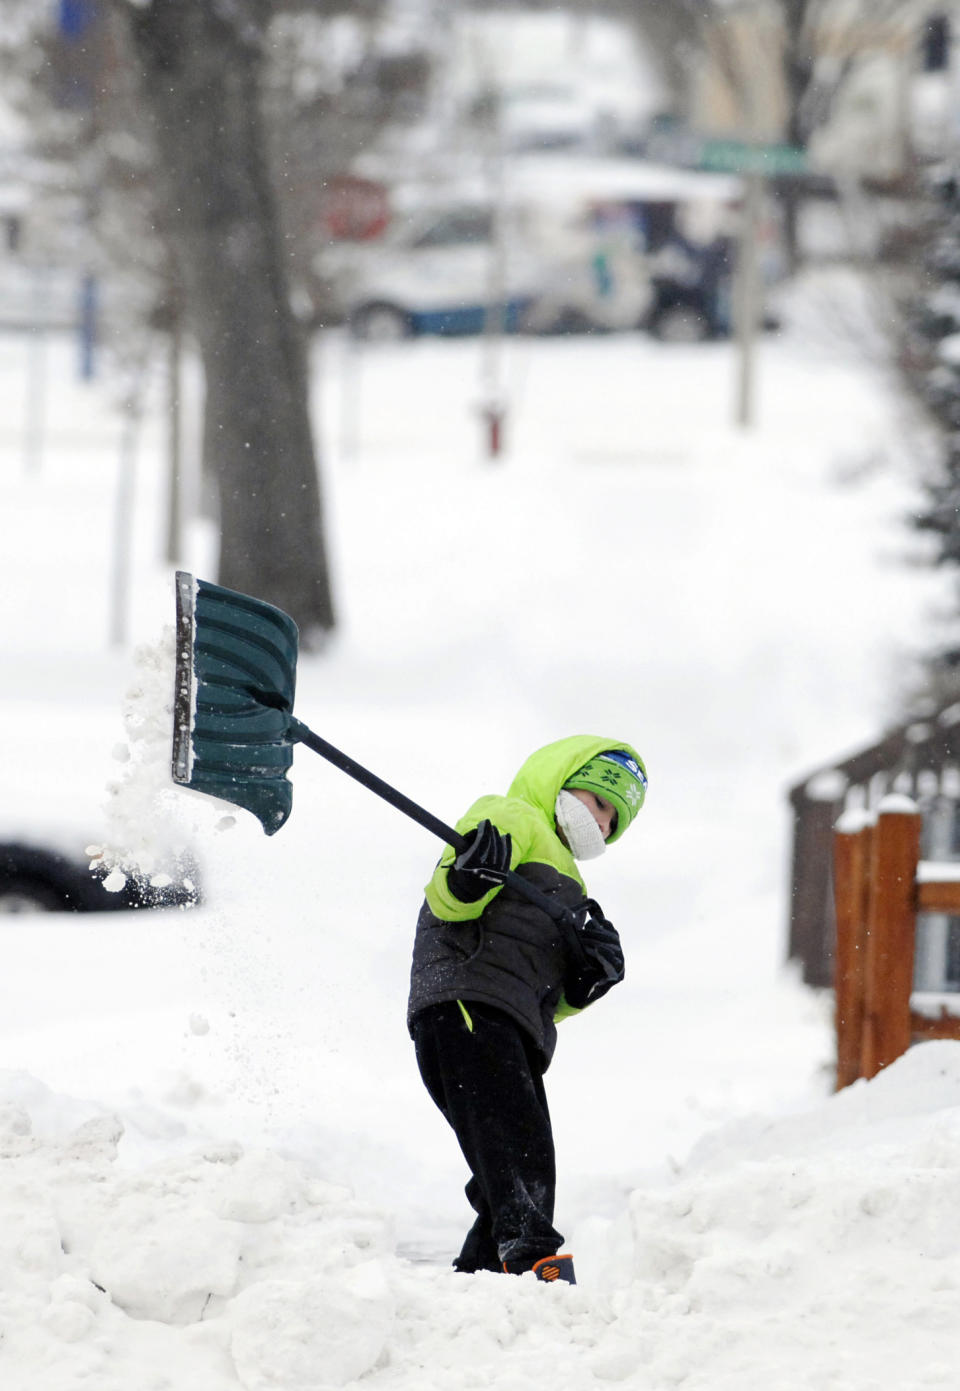 Vincent Schaff, 8, uses all of his body as he heaves a shovel full of snow from the sidewalk of his grandmother's home along Rosser Avenue Thursday, Dec. 27, 2018, in Bismarck, N.D. Forecasters posted a blizzard warning for parts of the Dakotas and Minnesota as a major winter storm delivered heavy snow and gusty winds to the region. (Mike McCleary/The Bismarck Tribune via AP)